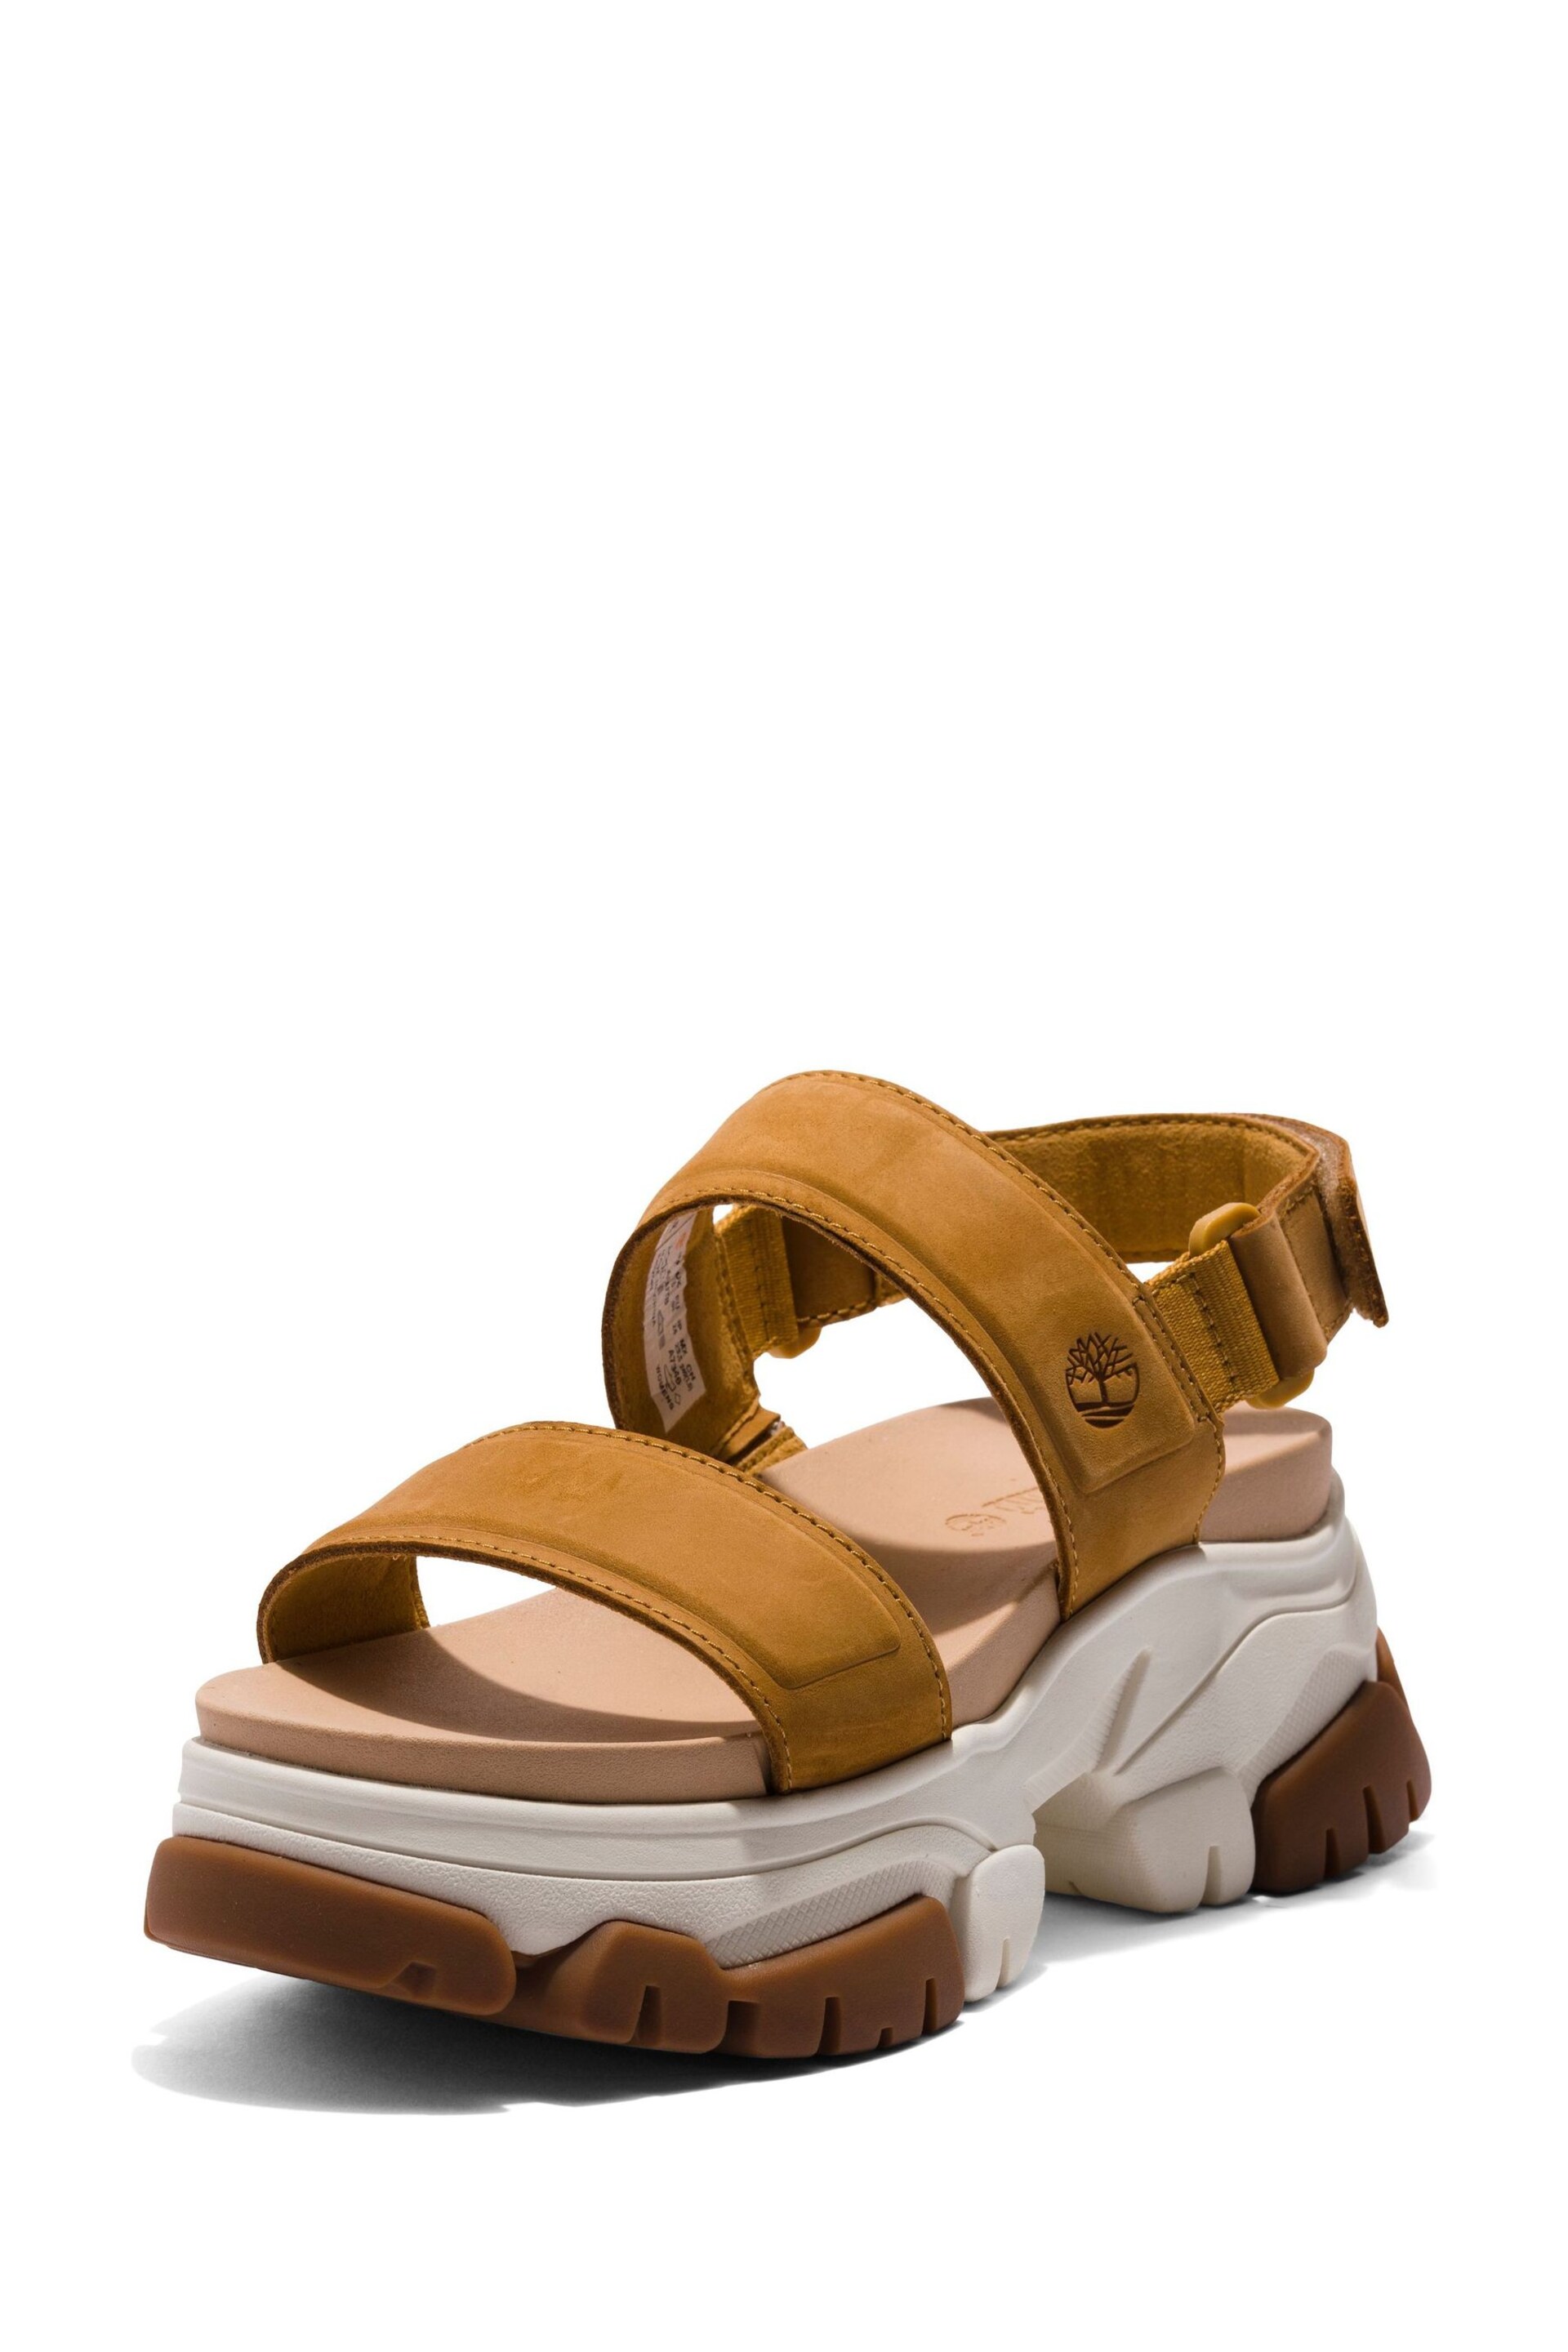 Timberland Yellow Adley Way Sandals - Image 5 of 9